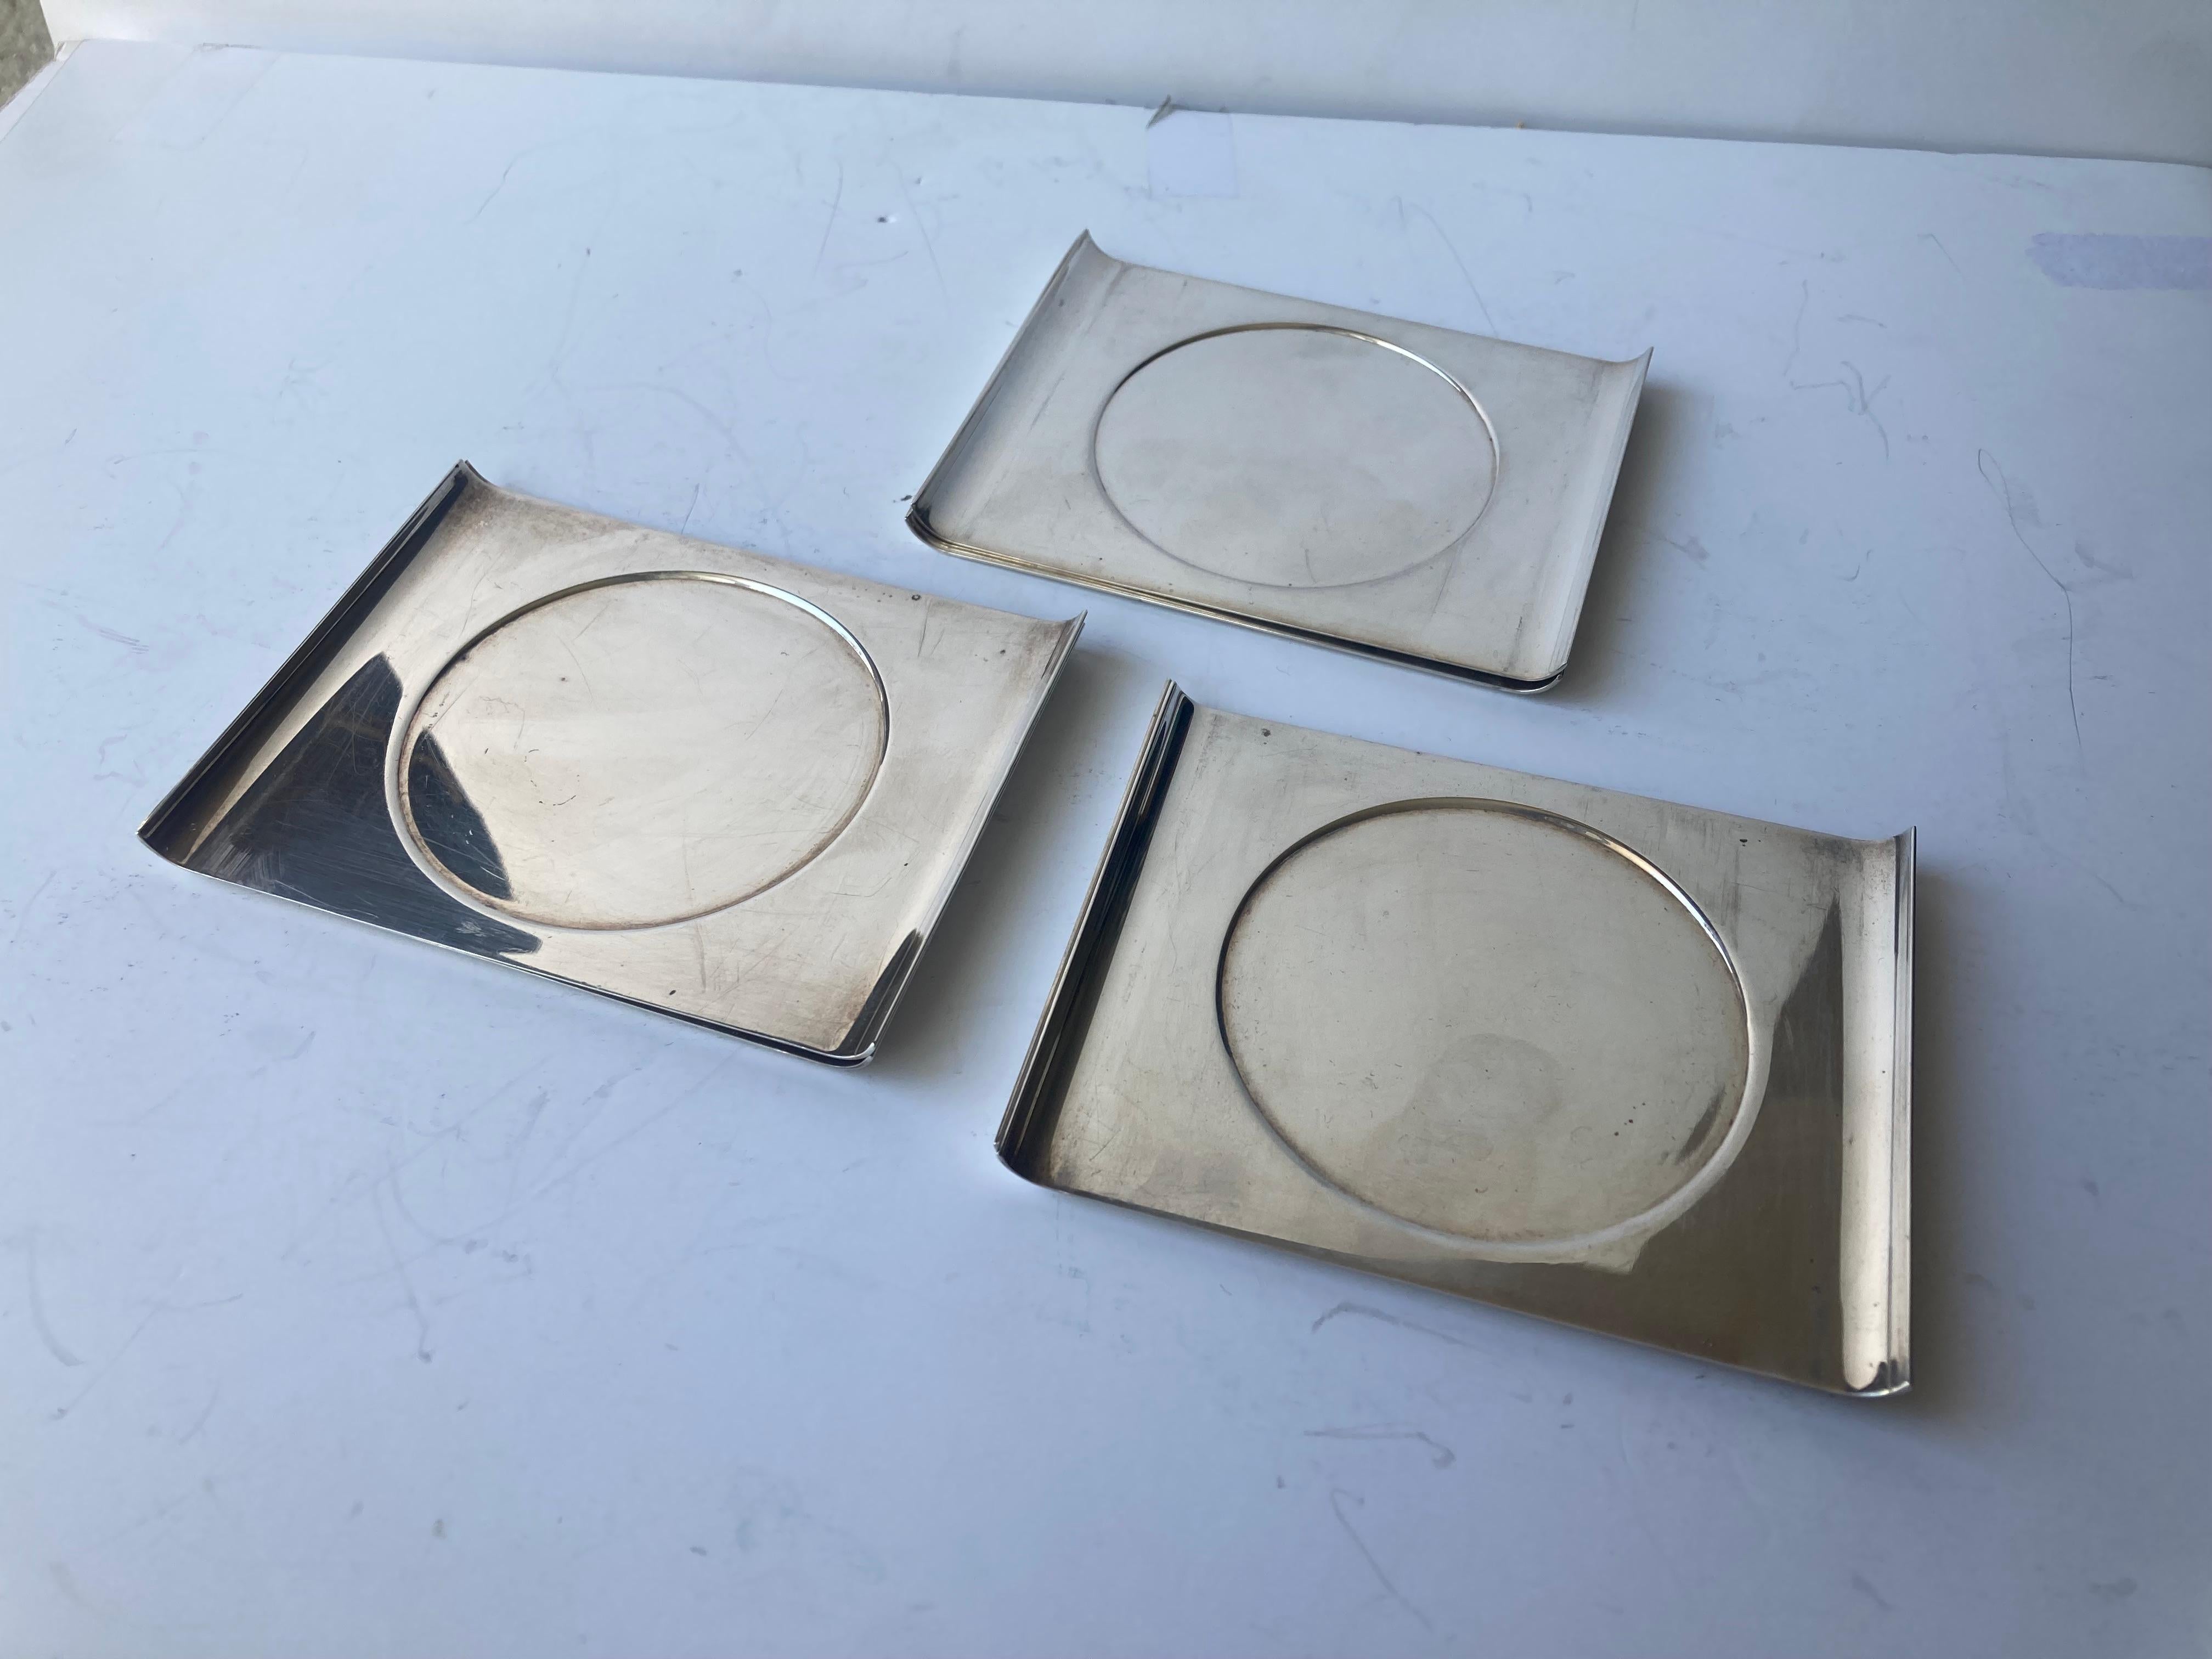 Nice collection of six Sabattini coasters in stainless steel. All marked with the standard Sabattini hallmark .